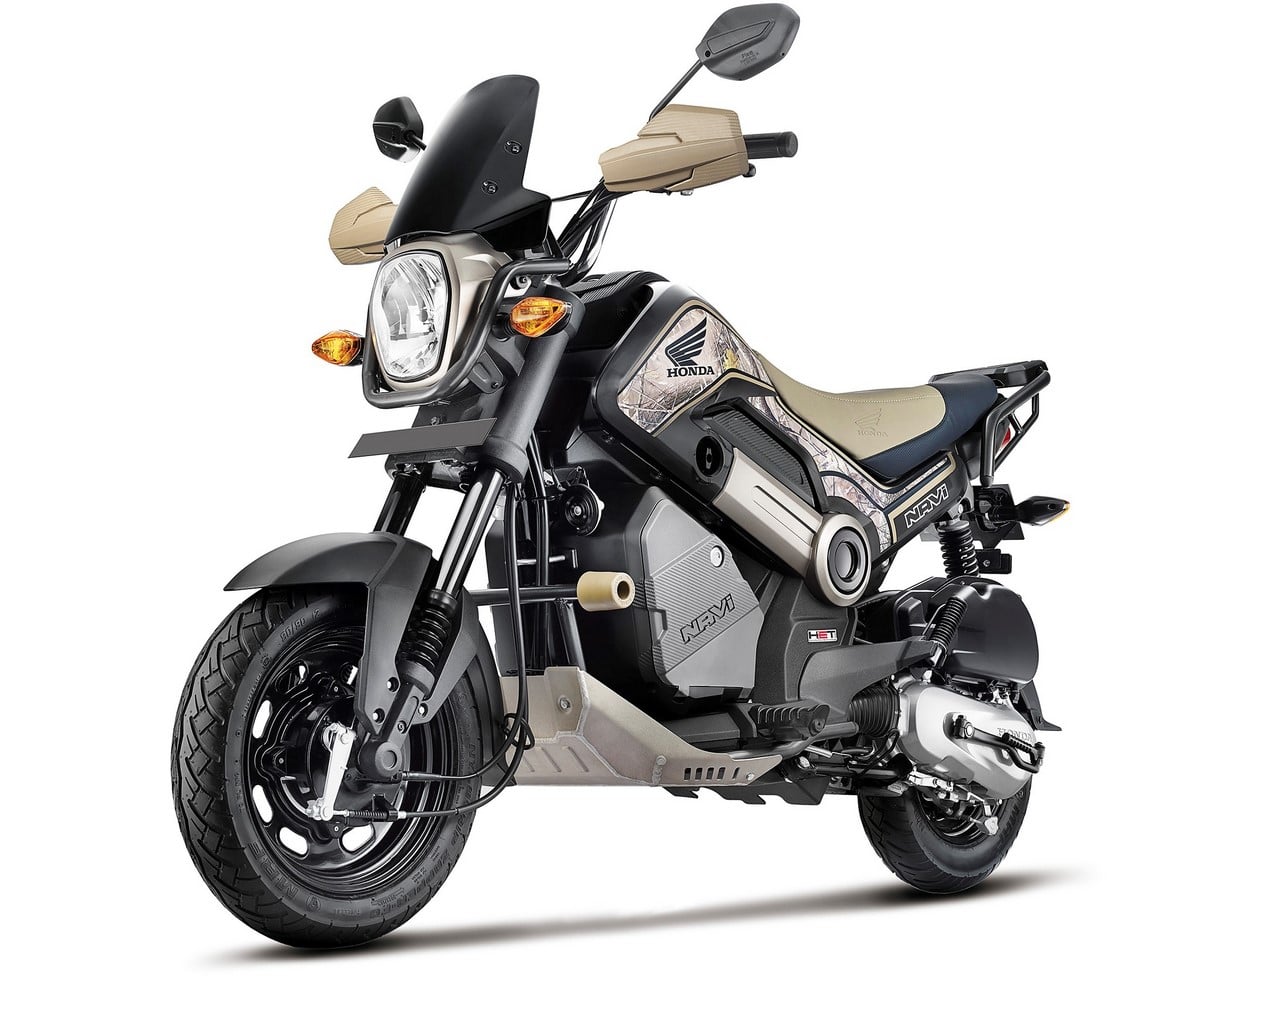 Honda Navi Price, Mileage, Specs And Features All You Need To Know